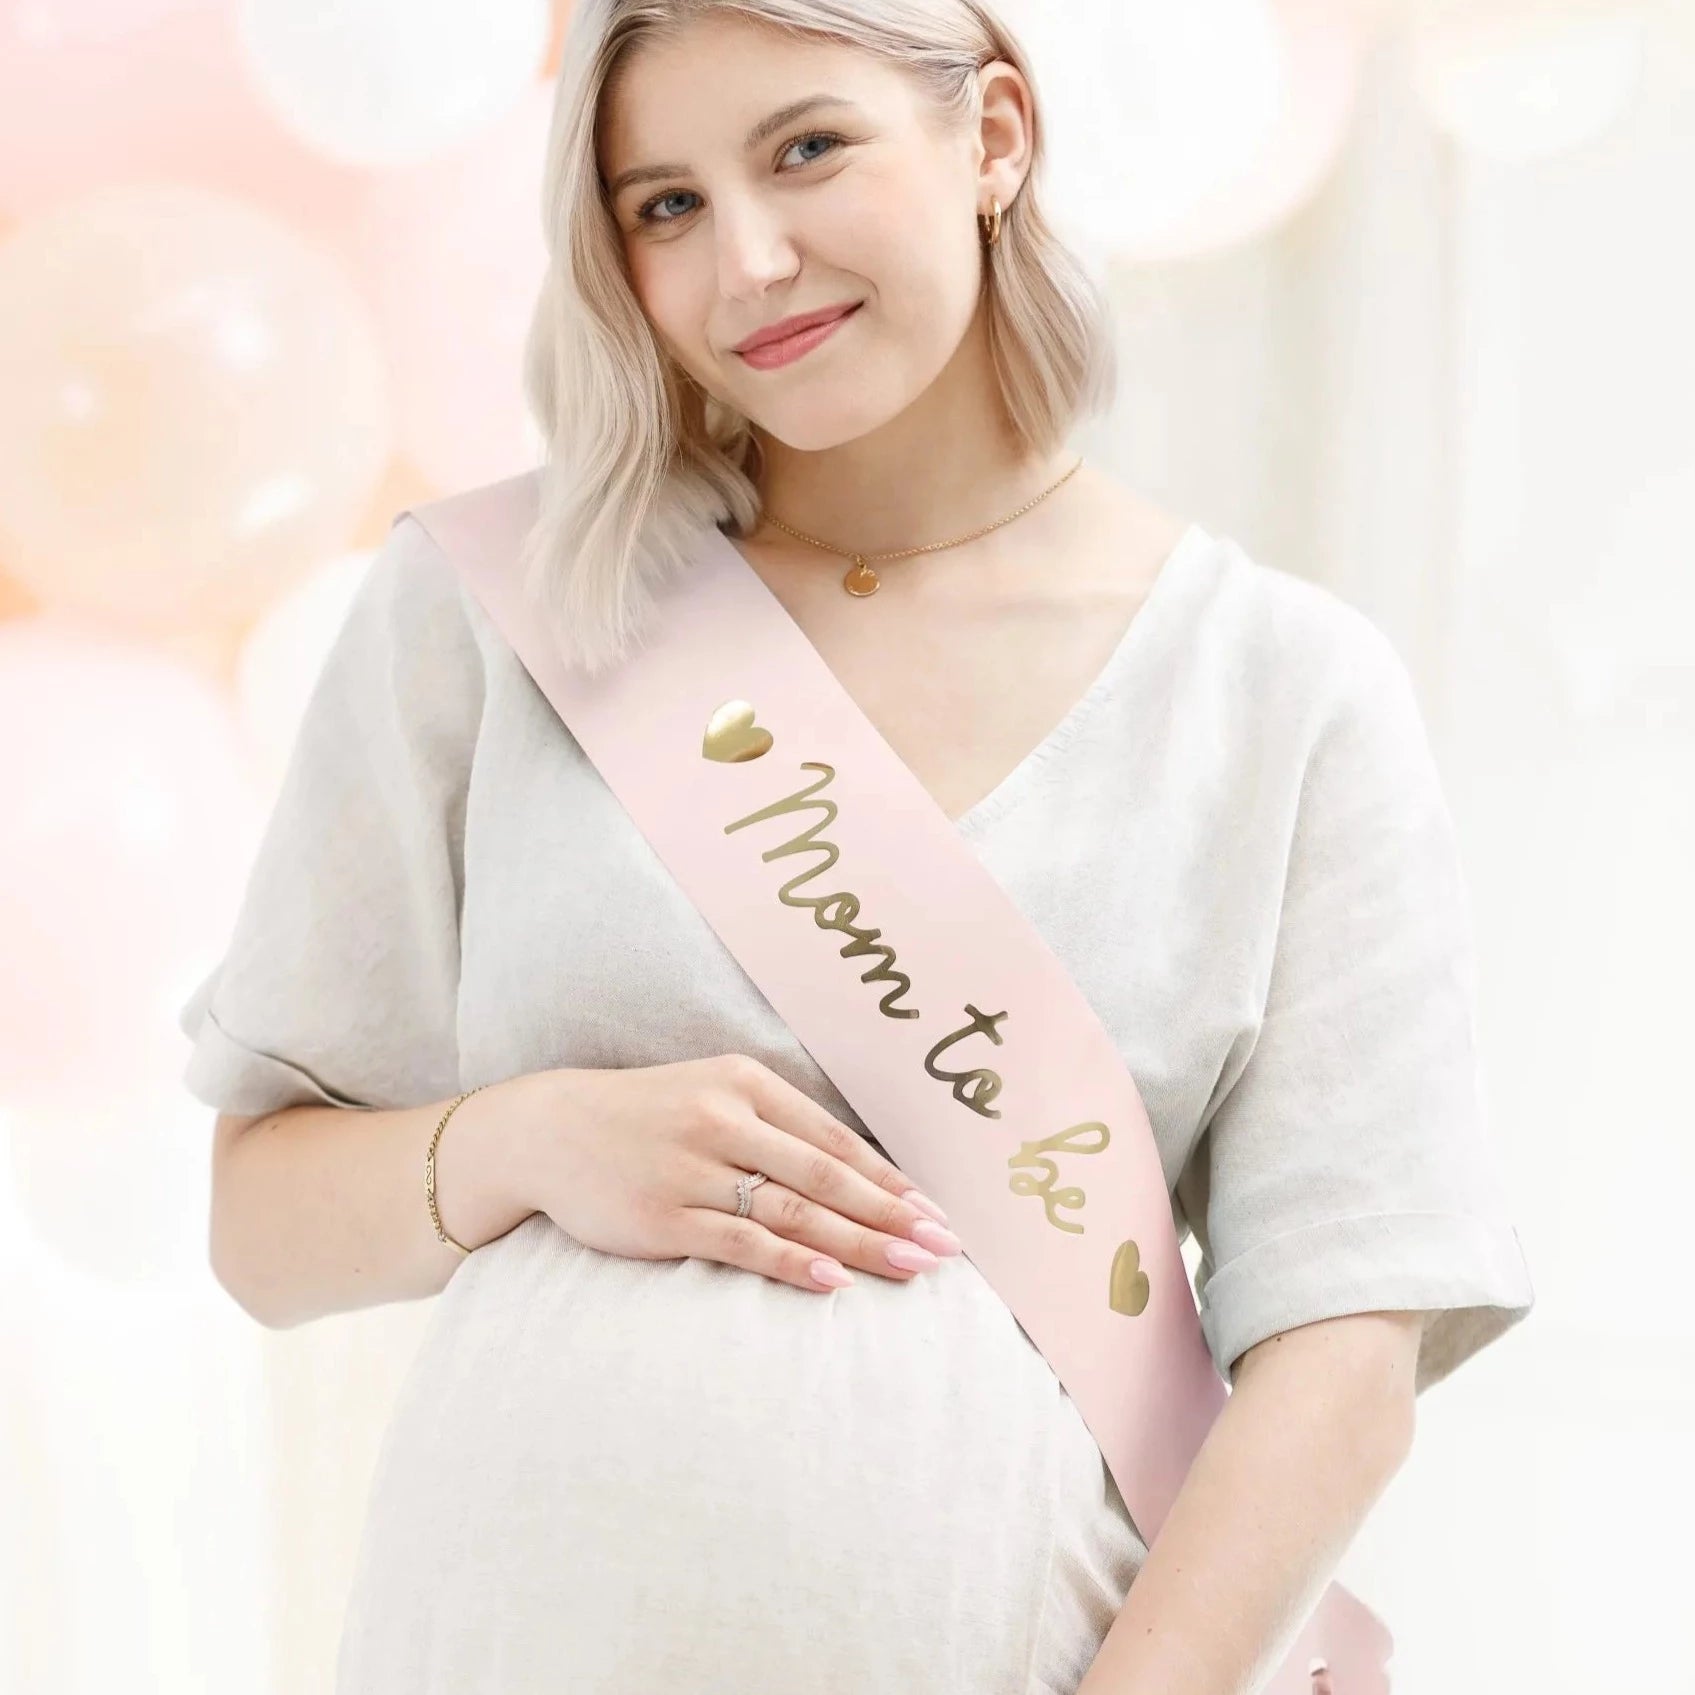 PartyDeco: Pink Sash for the future Mother Mom To Be